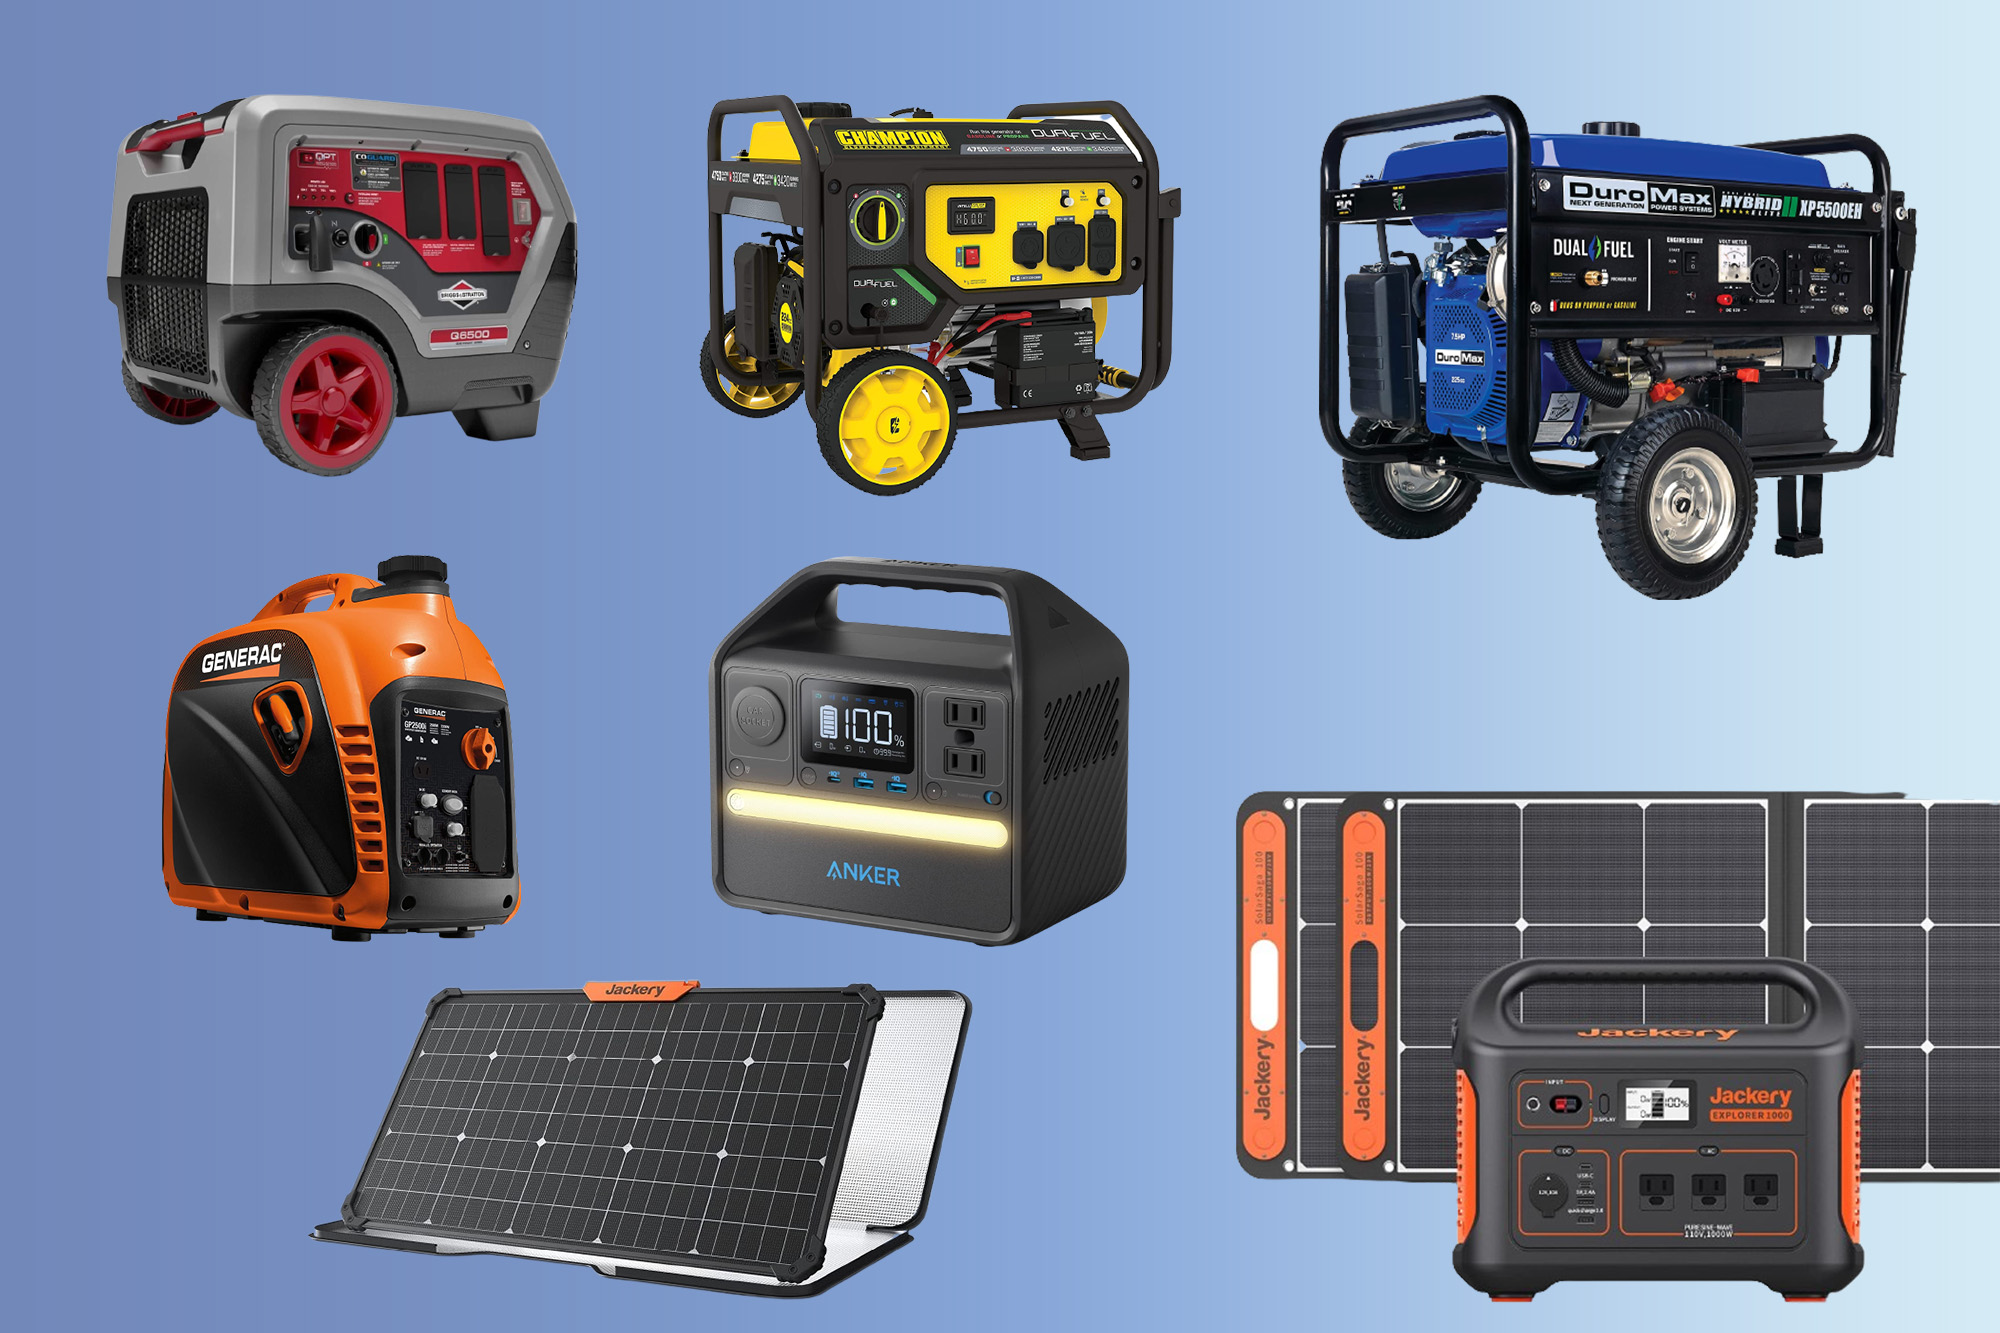 The best Memorial Day generator deals: Solar, electric, and gas-powered models